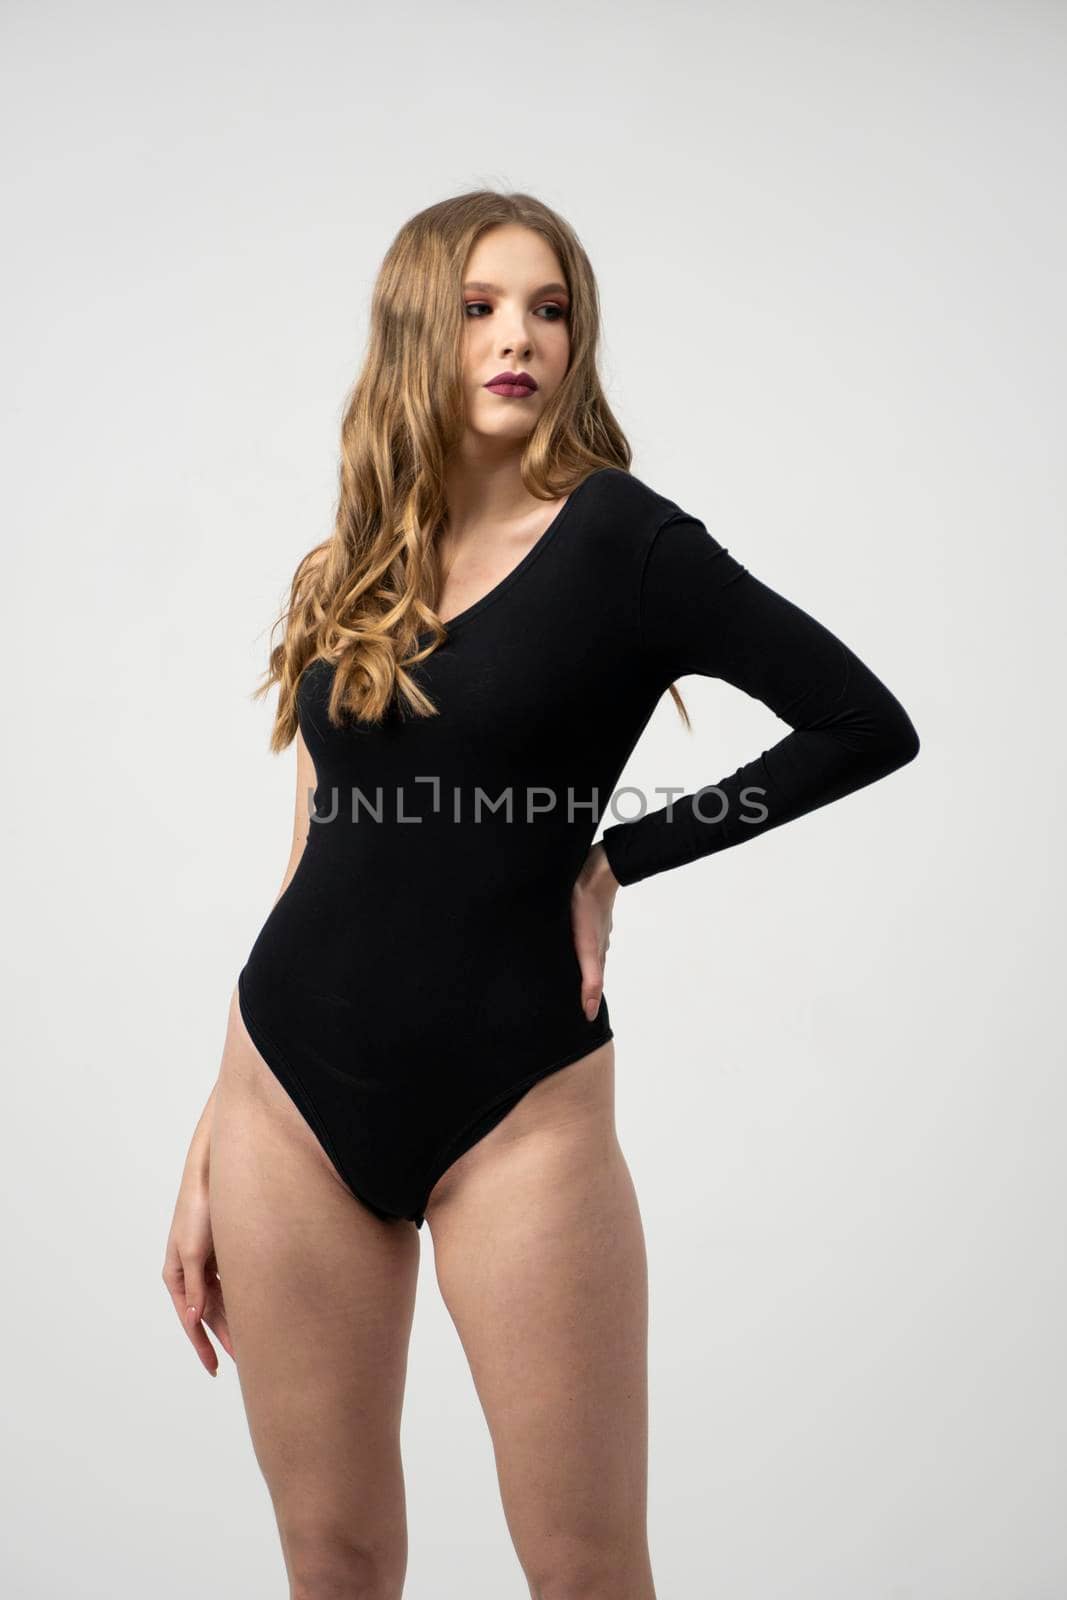 Beautiful young woman portrait in a black bodysuit. Studio shot, isolated on gray background